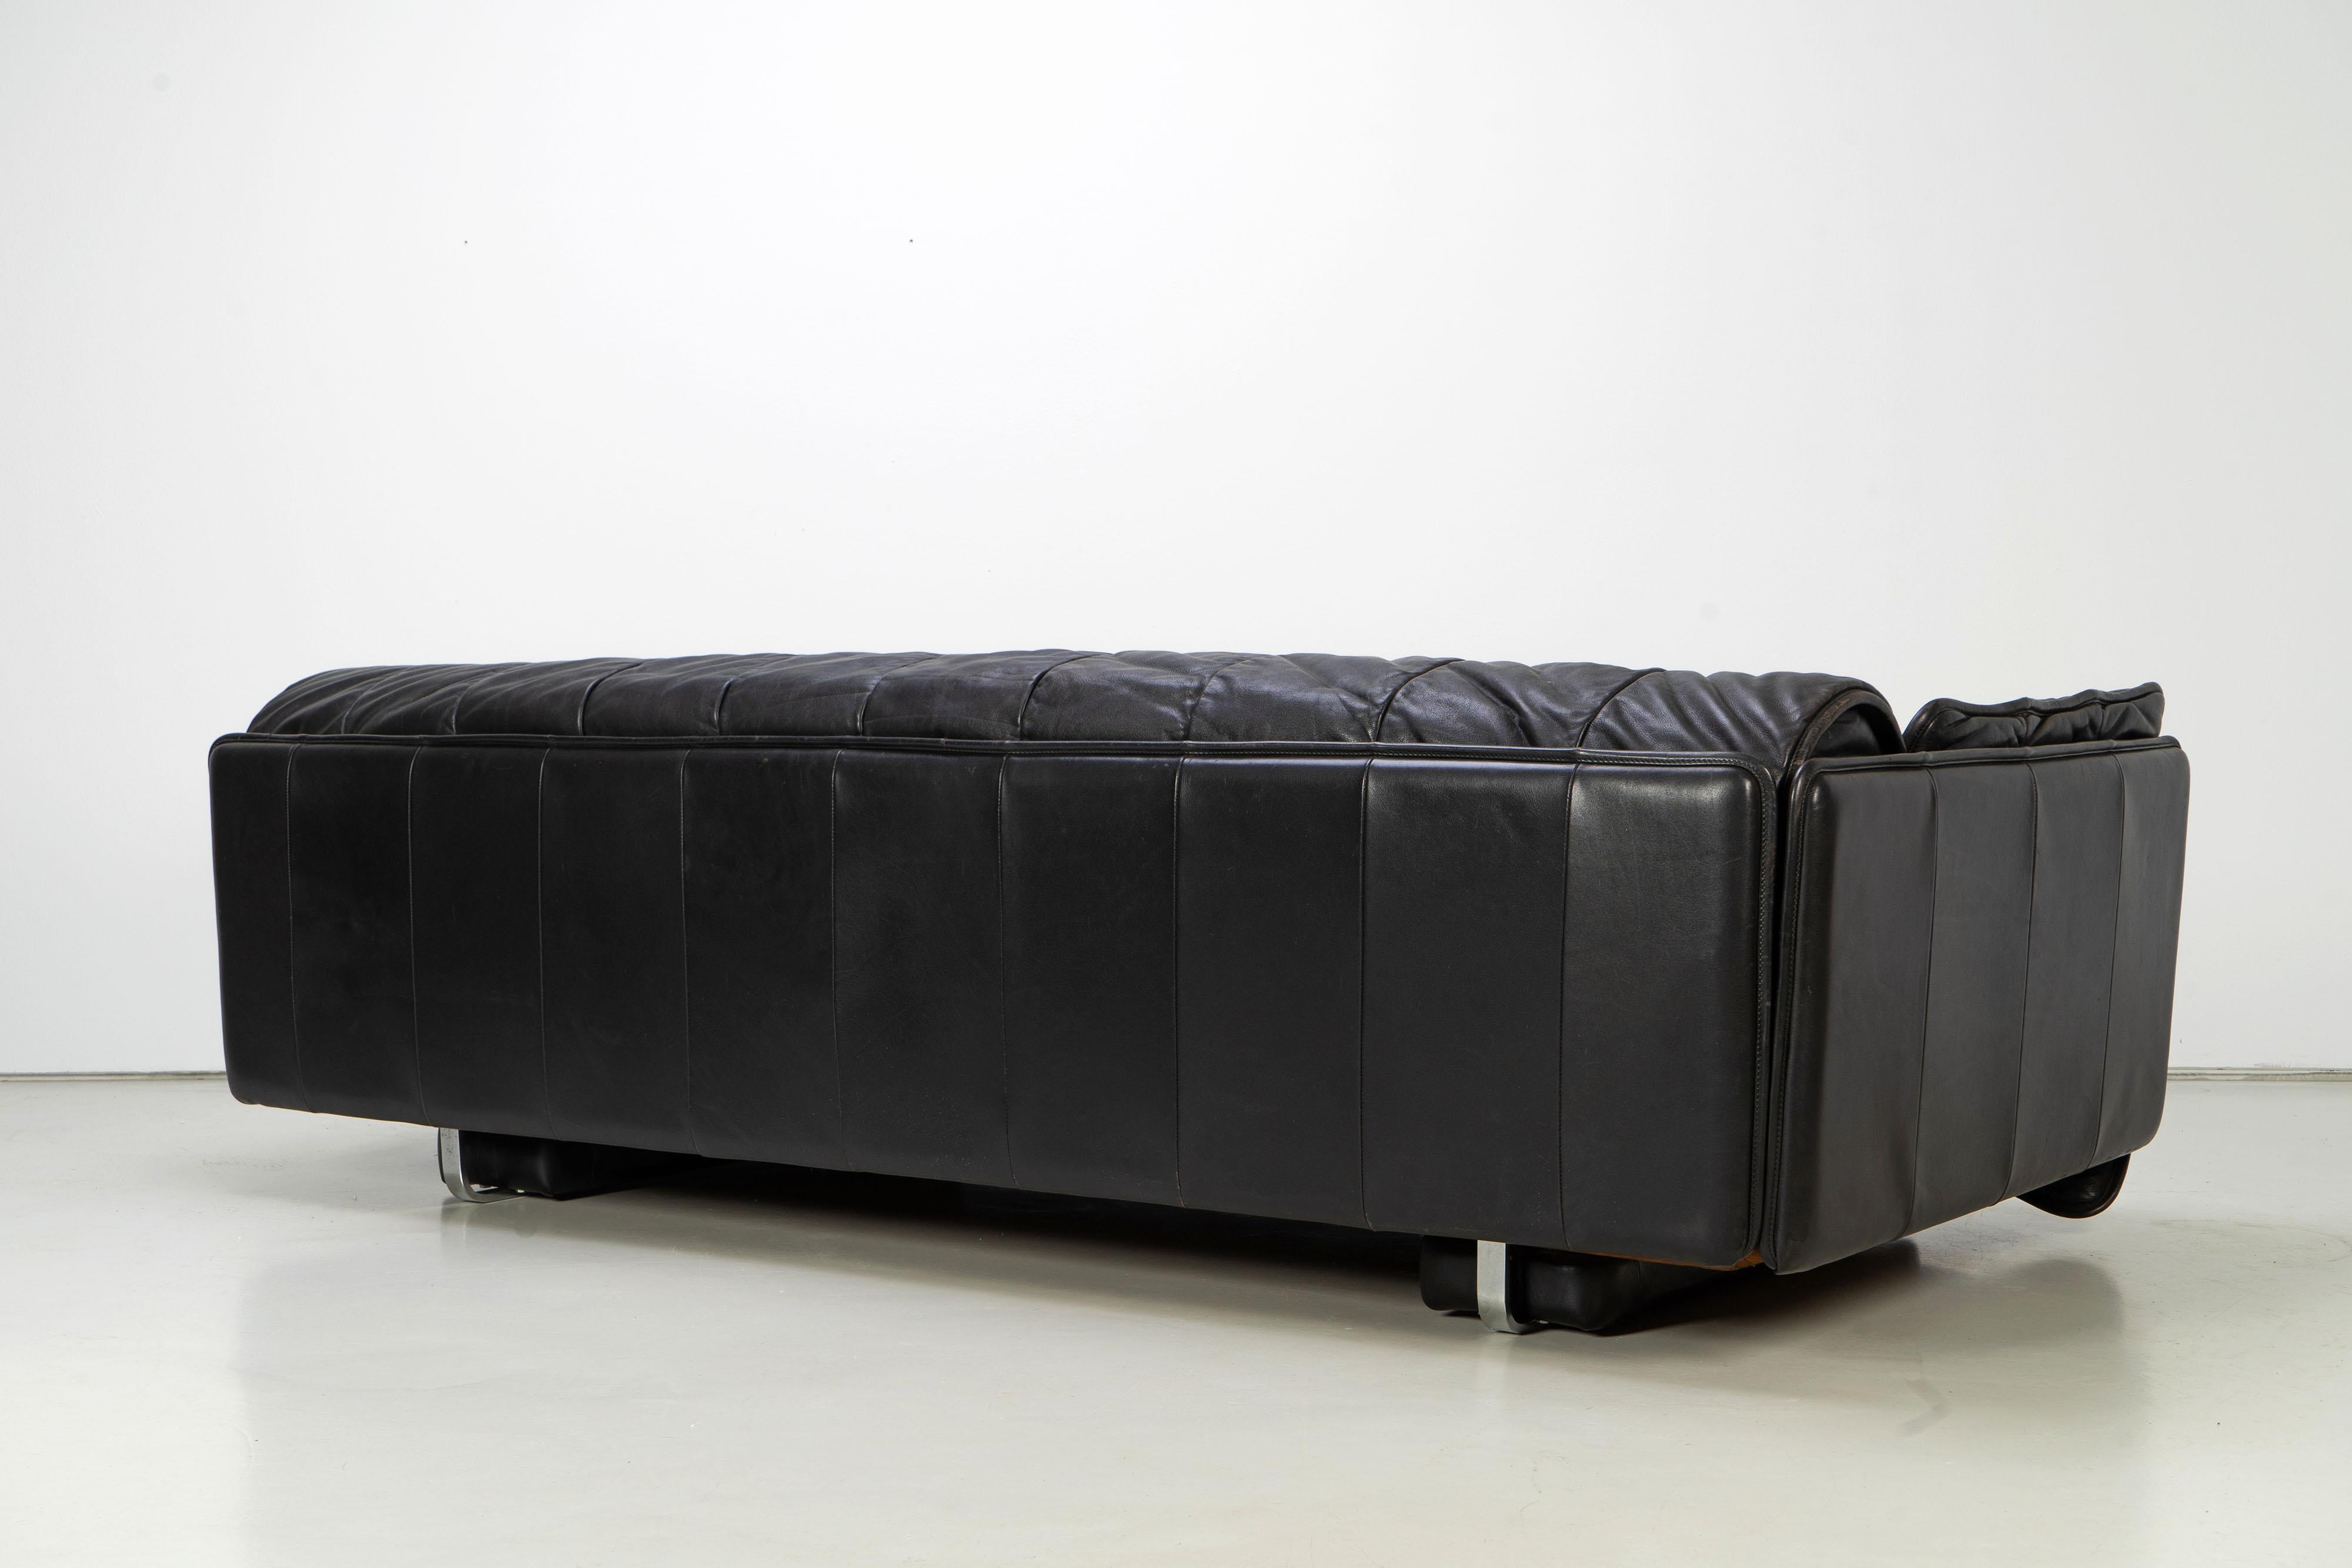 20th Century 1970s Sofa De Sede DS-69 Switzerland Black Leather Daybed For Sale